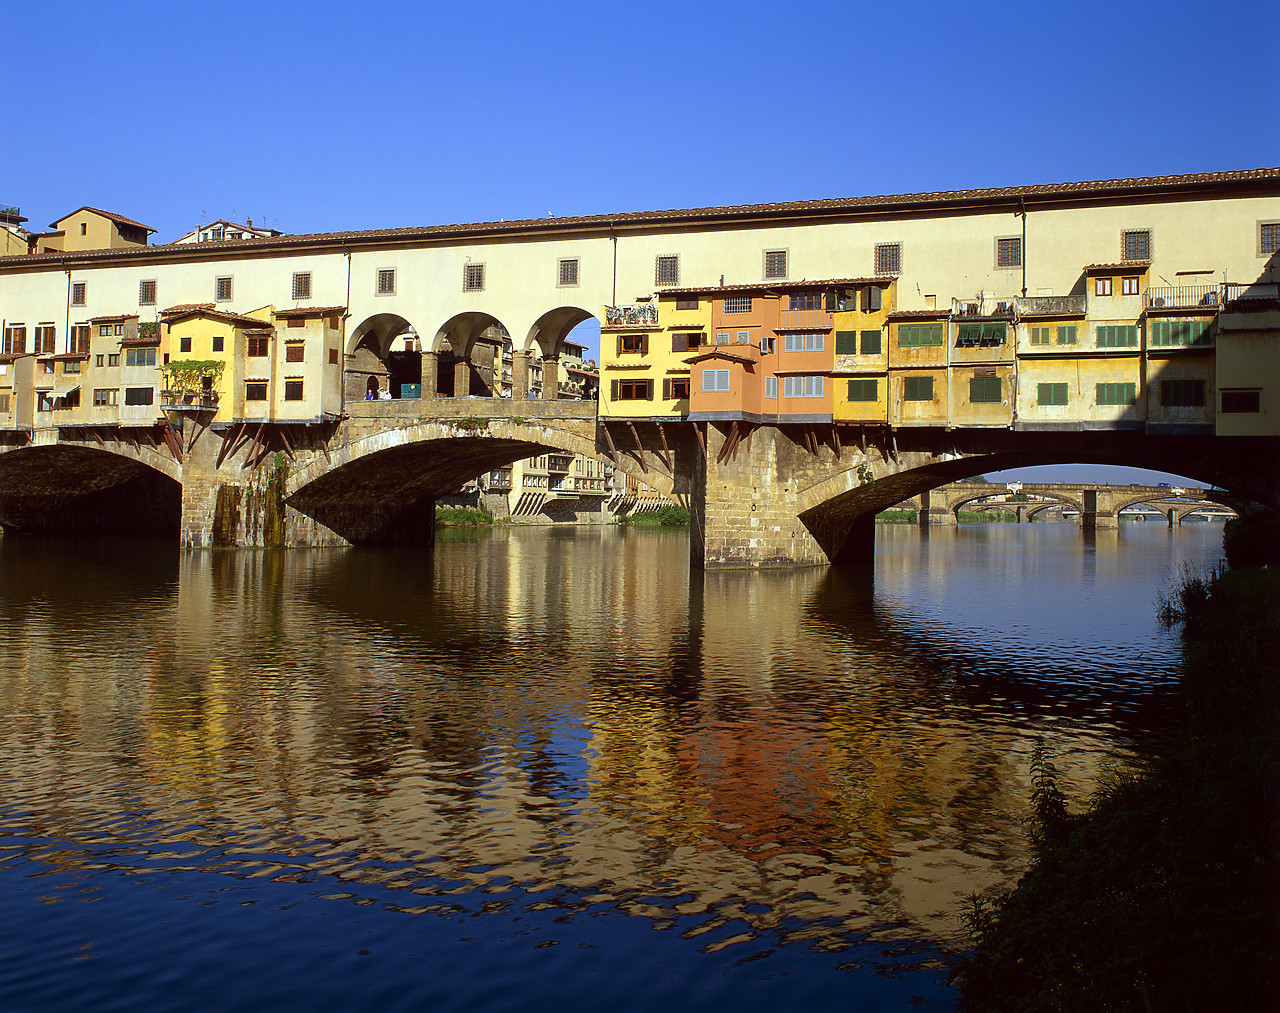 #020091-2 - Ponte Vecchio Reflecting in River Arno, Florence, Tuscany, Italy